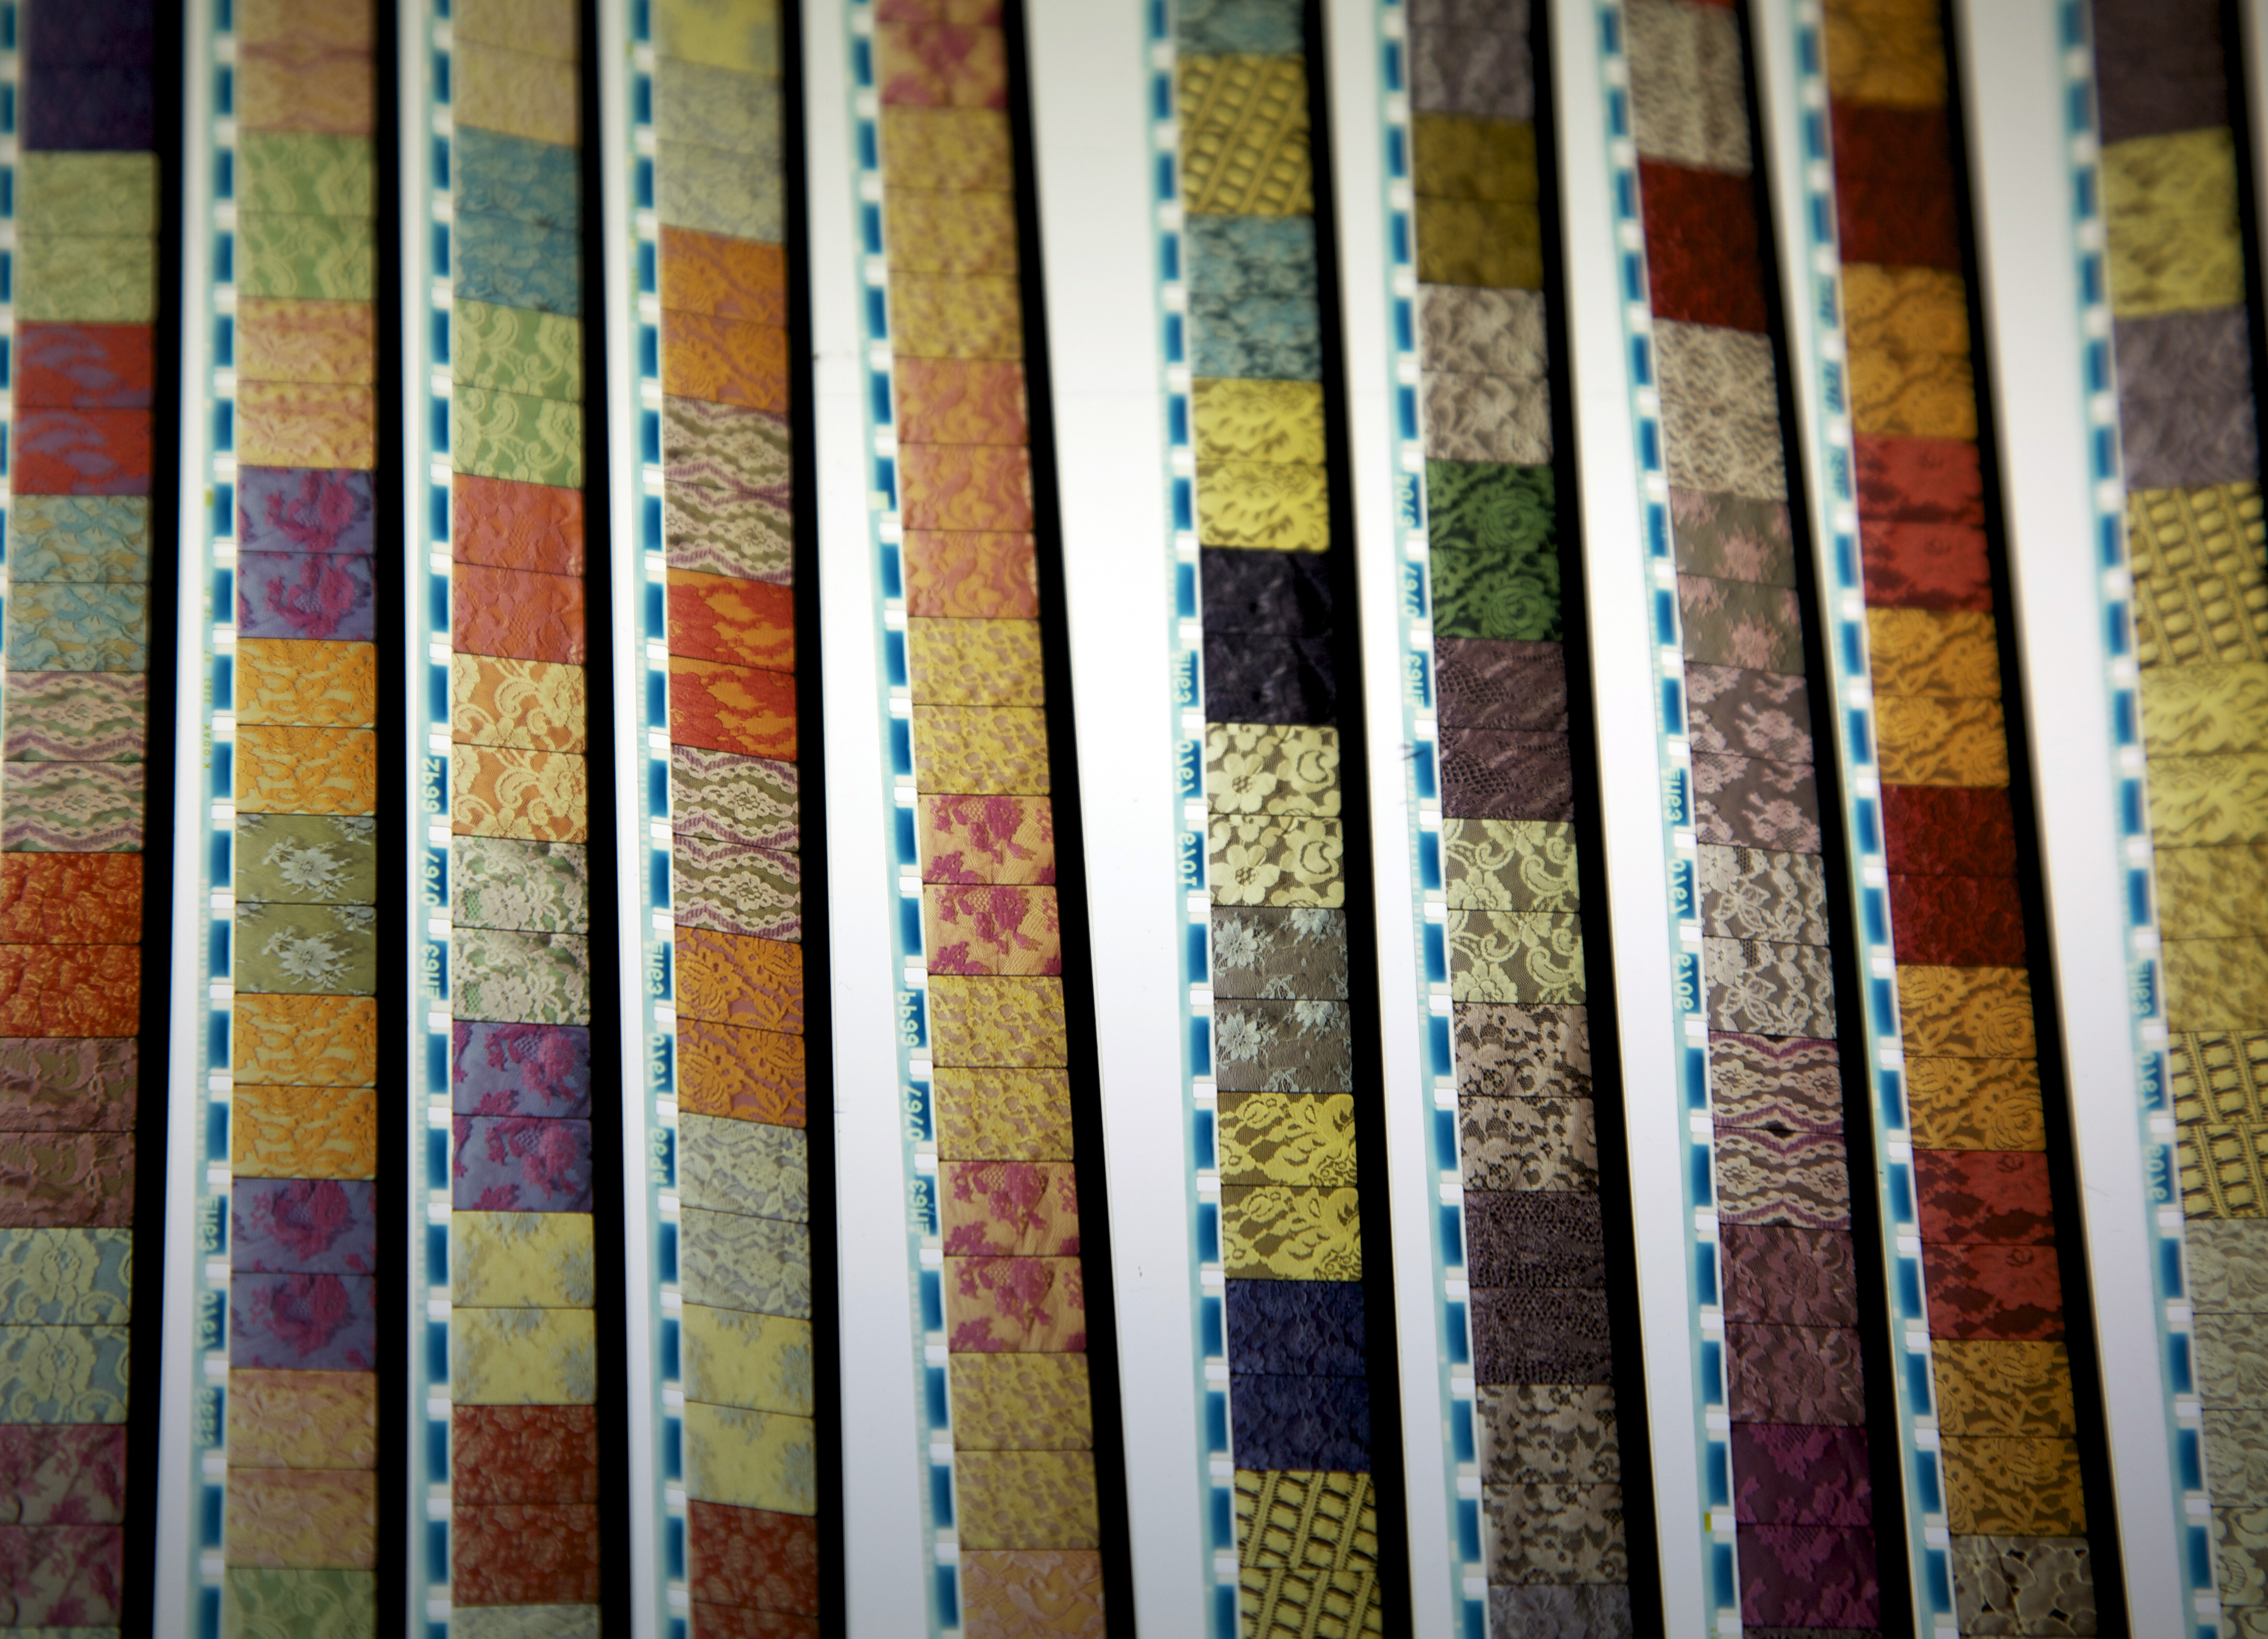 Still from Point de Glaze: Patterned materials layered on top of each other.